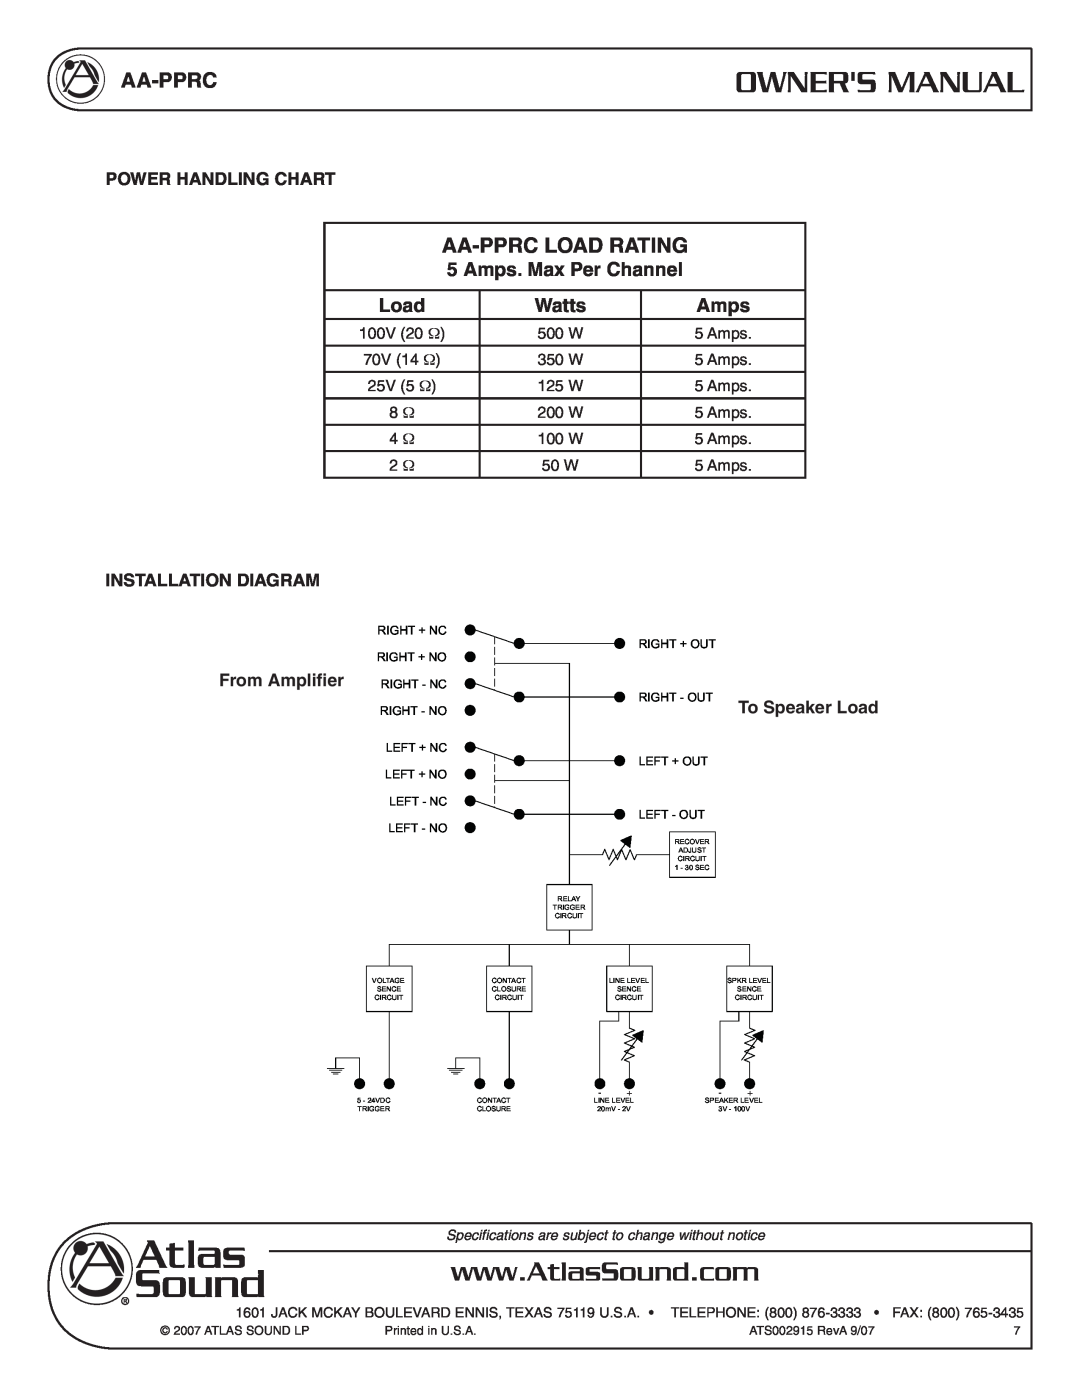 Atlas Sound AA-PPRC owner manual Aa-Pprc Load Rating, Amps. Max Per Channel, Watts, Power Handling Chart, To Speaker Load 